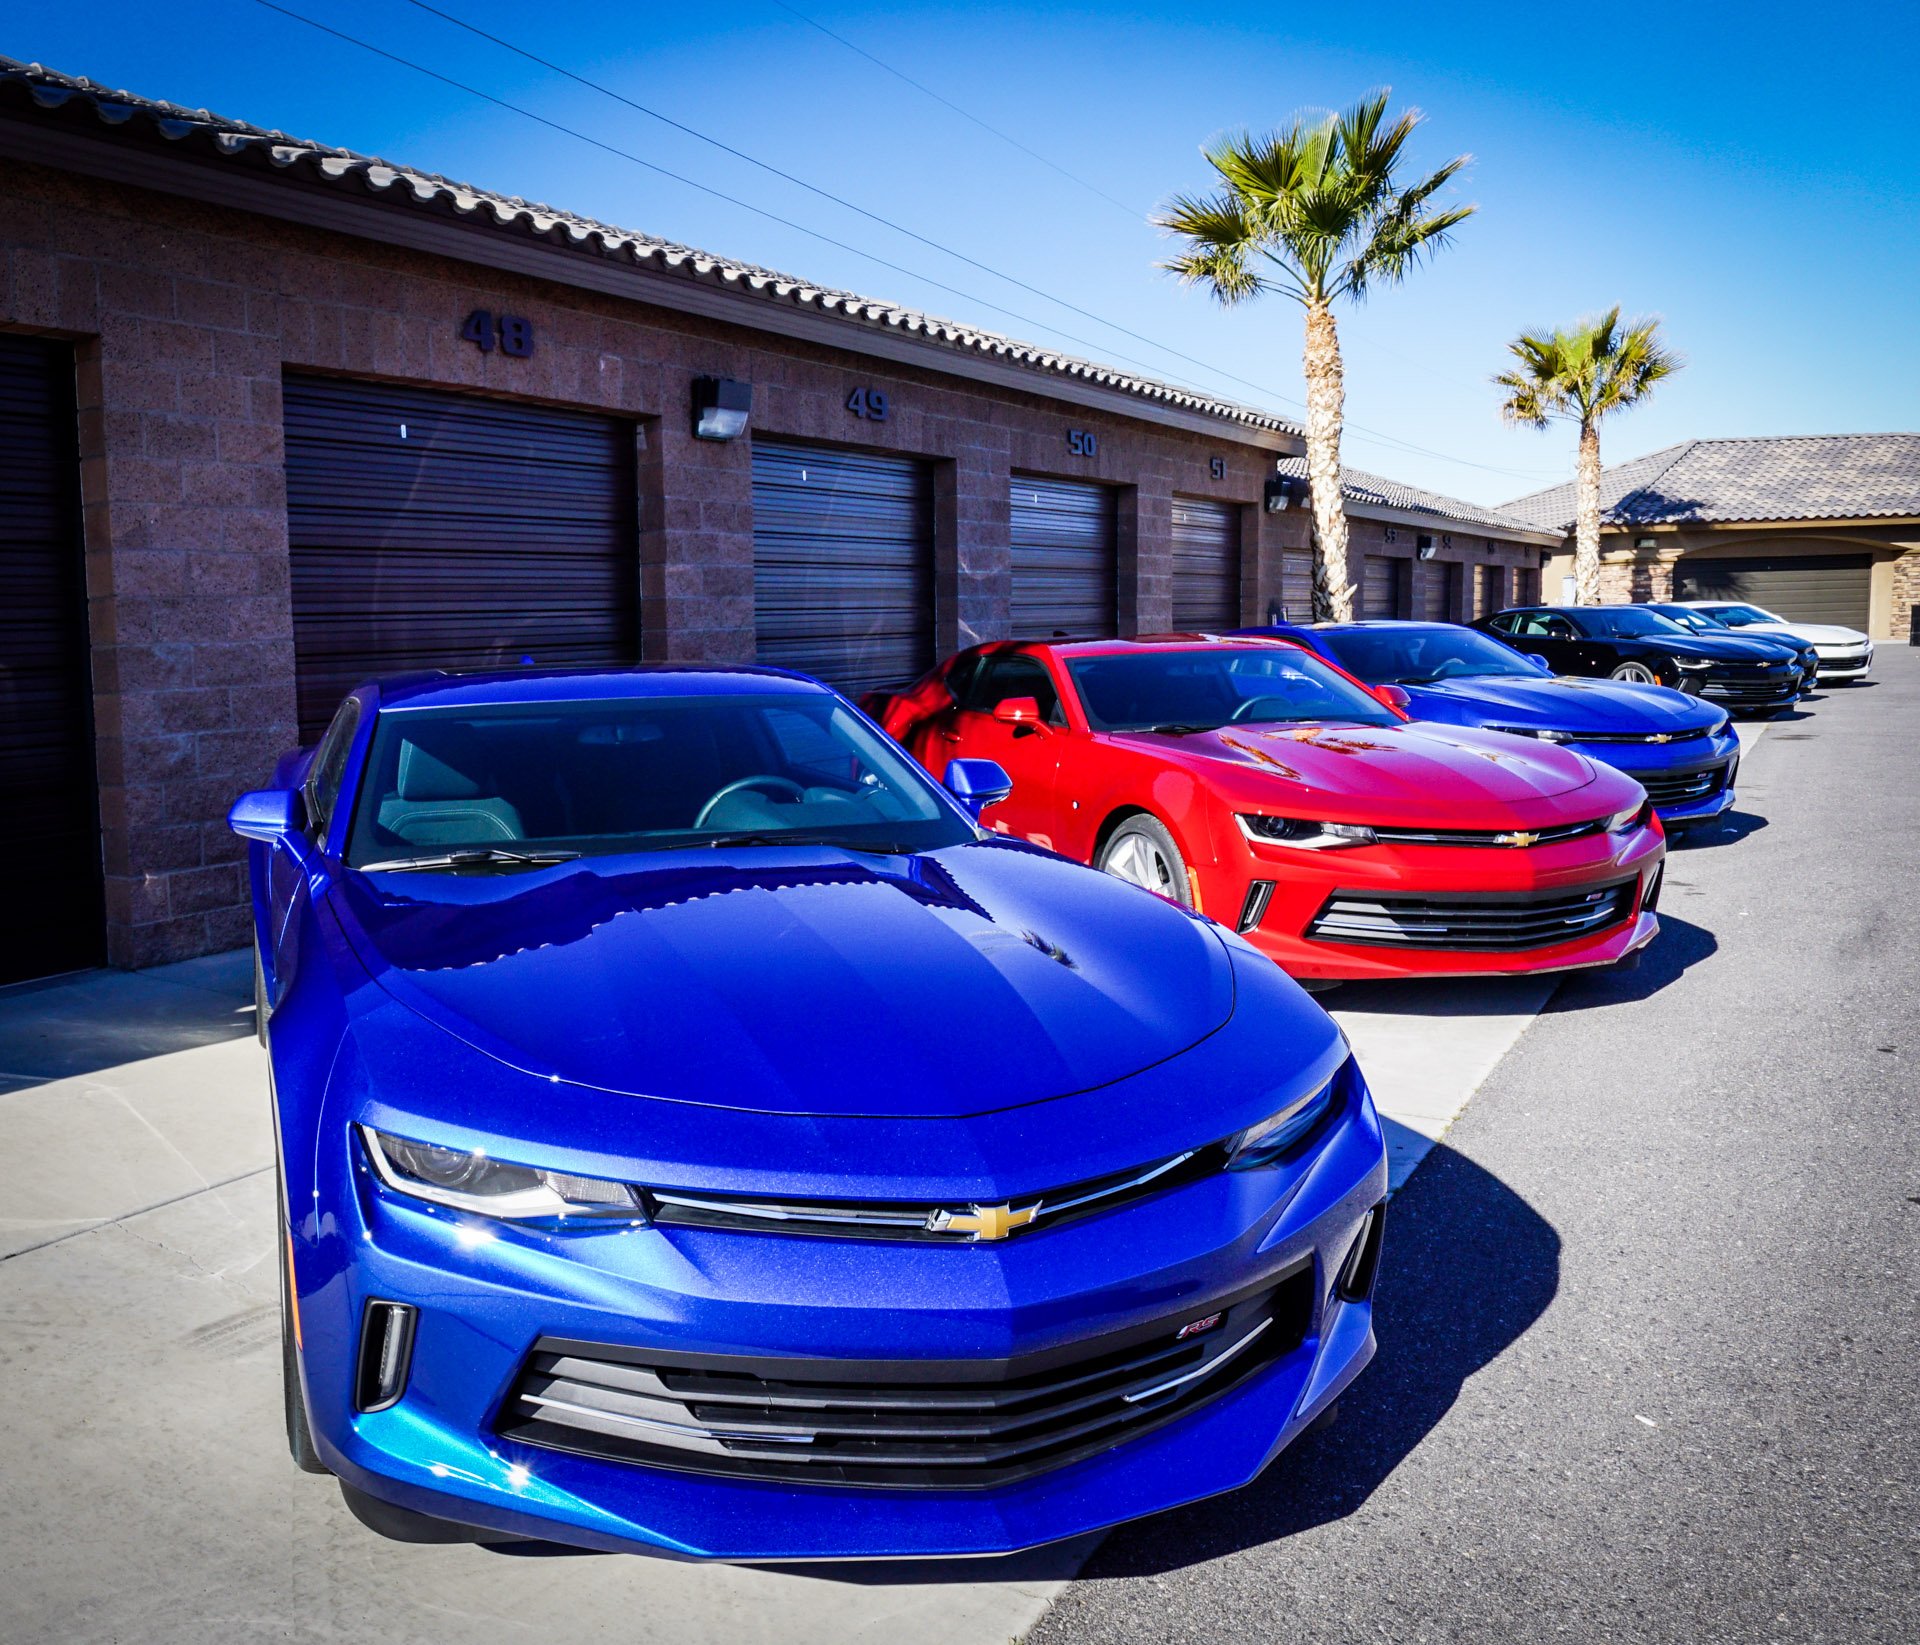 First Drive Review: 2016 Chevrolet Camaro 2.0L Turbo